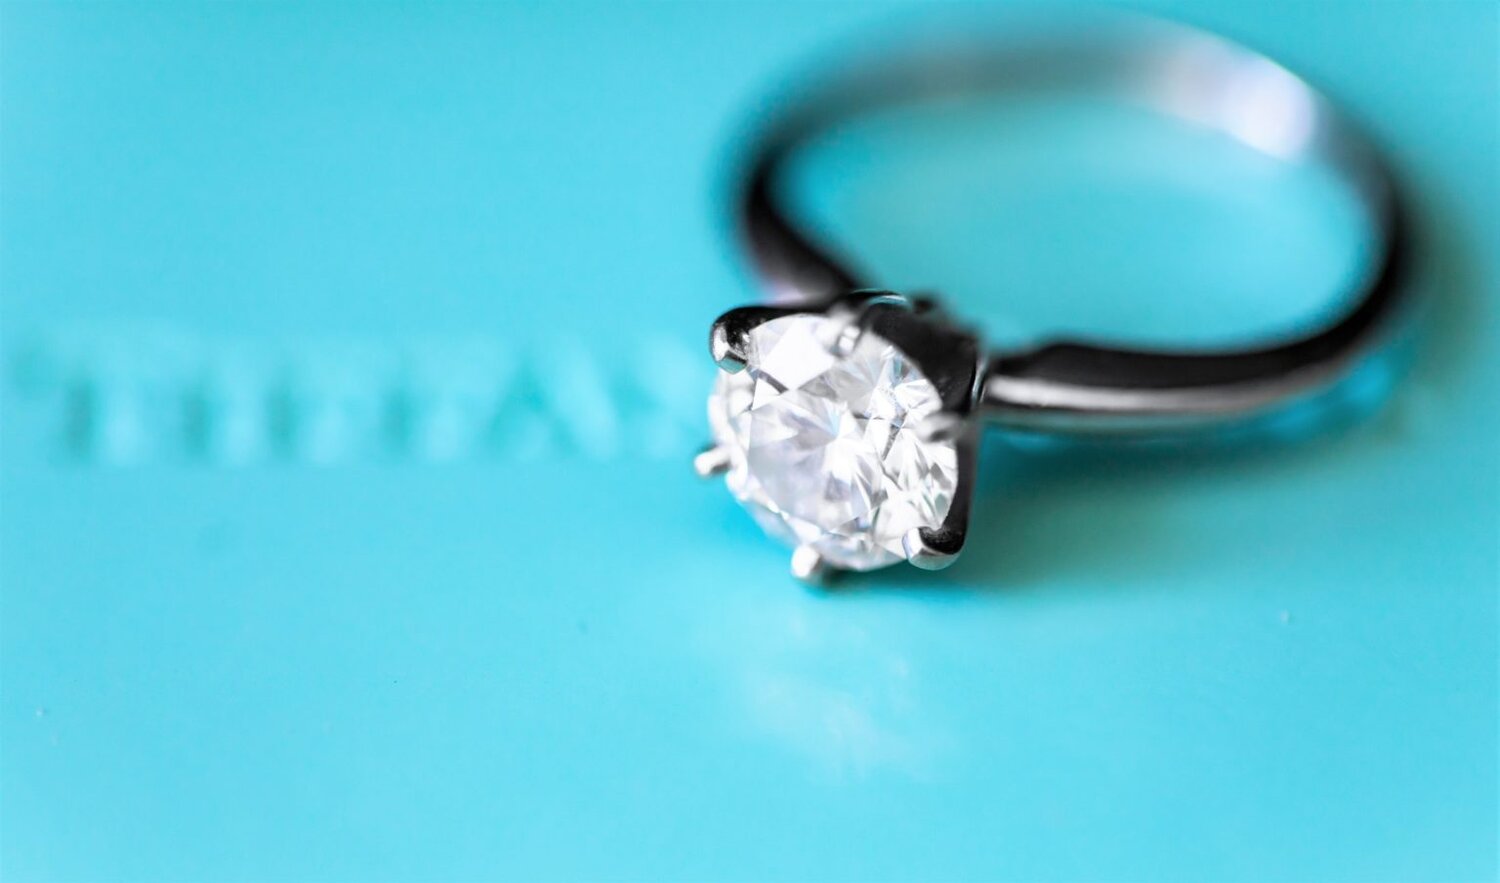 Stunning Cremation Diamonds: An Emerging Memorial Idea - EverDear™ |  EverDear™ | Cremation Diamonds from Ashes and Hair - from $ 895!